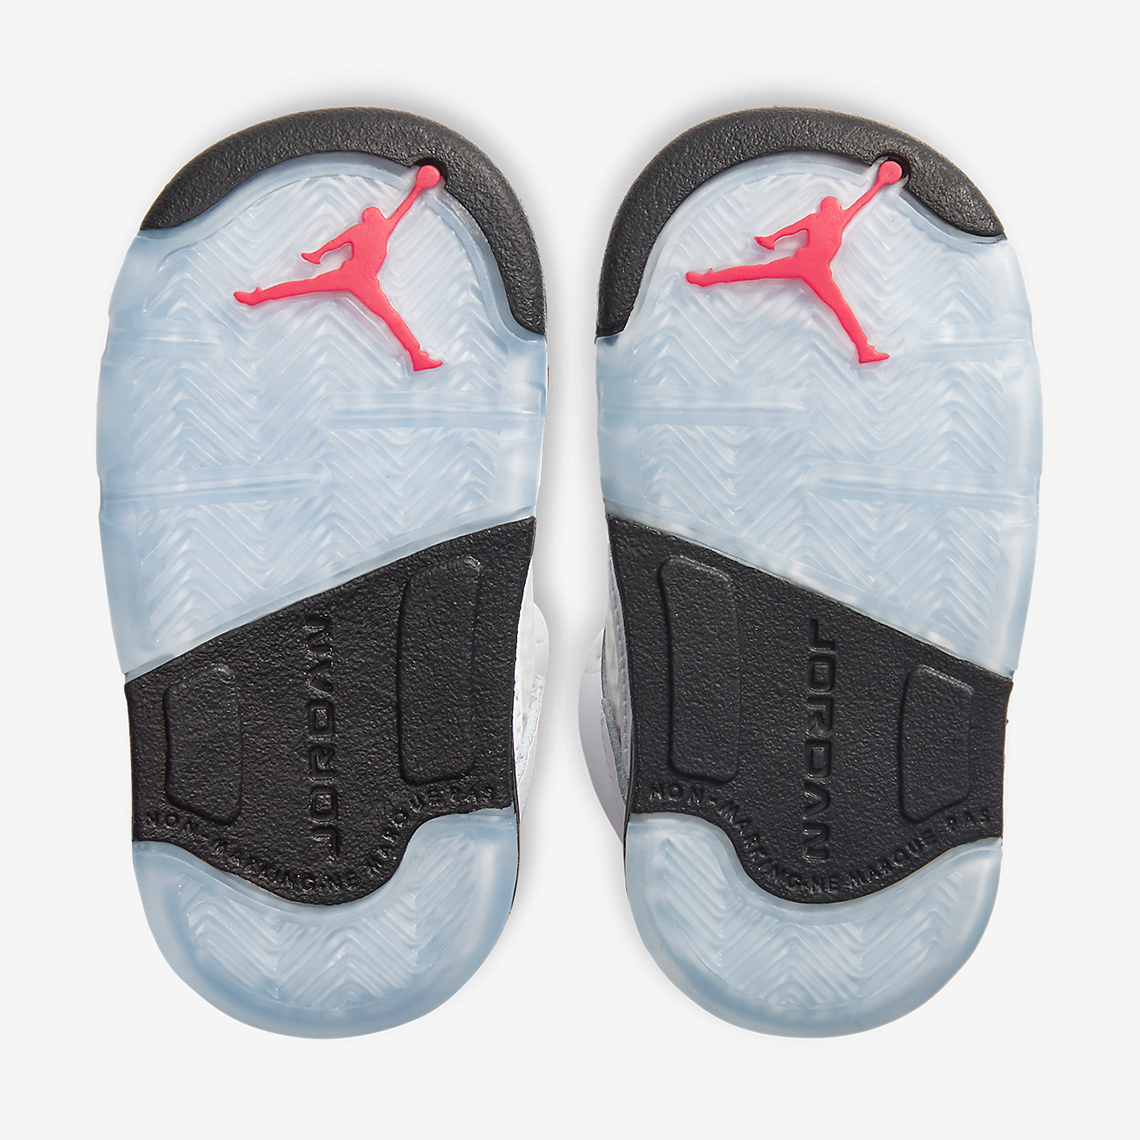 WINGS for the Jordan Brand 8×8 Collection Fire Red Infant 440890 102 2